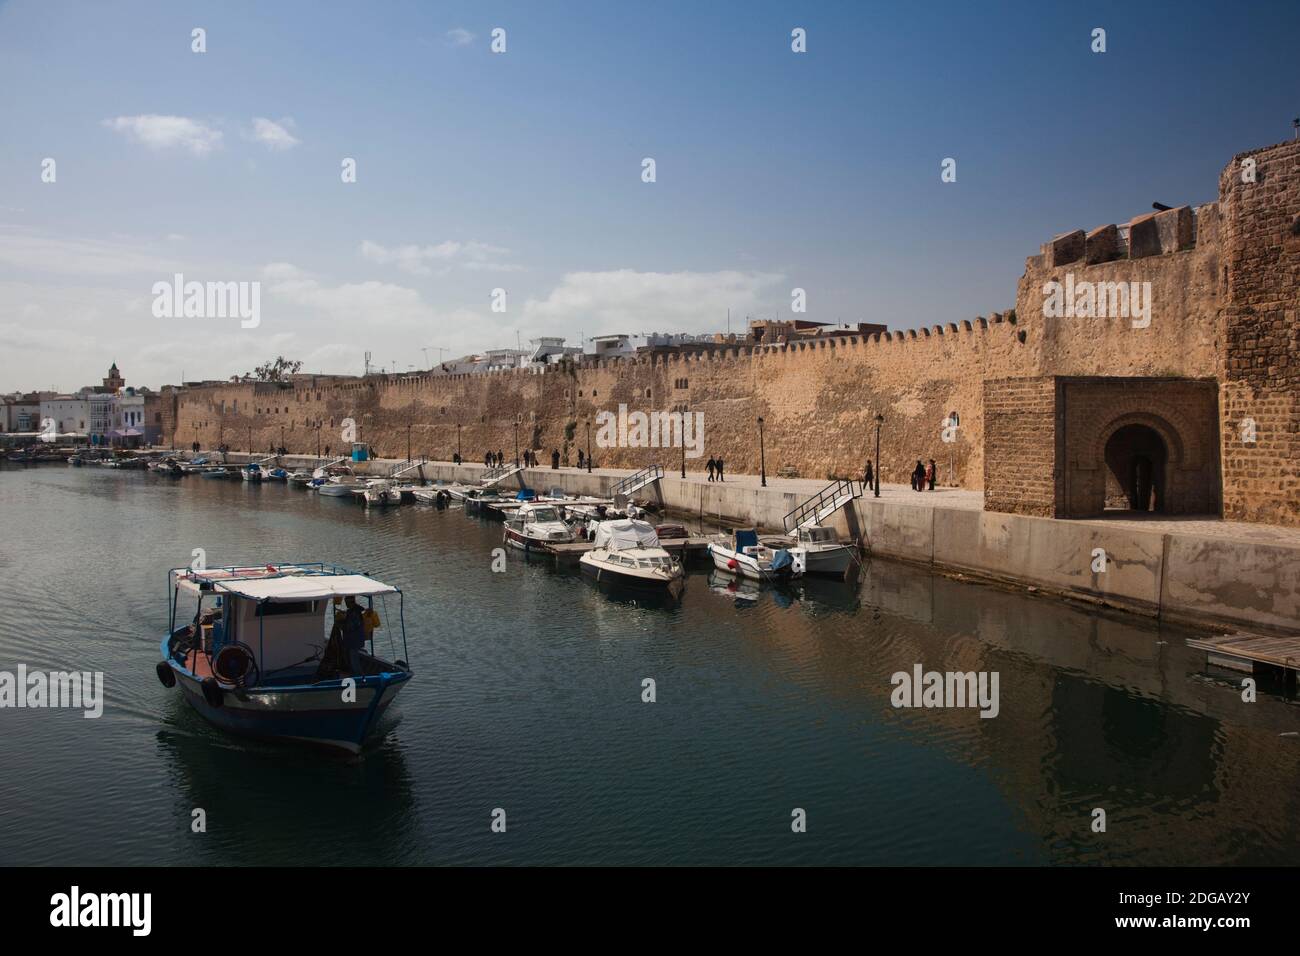 Boats moored at an old port, Bizerte, Bizerte Governorate, Tunisia Stock Photo